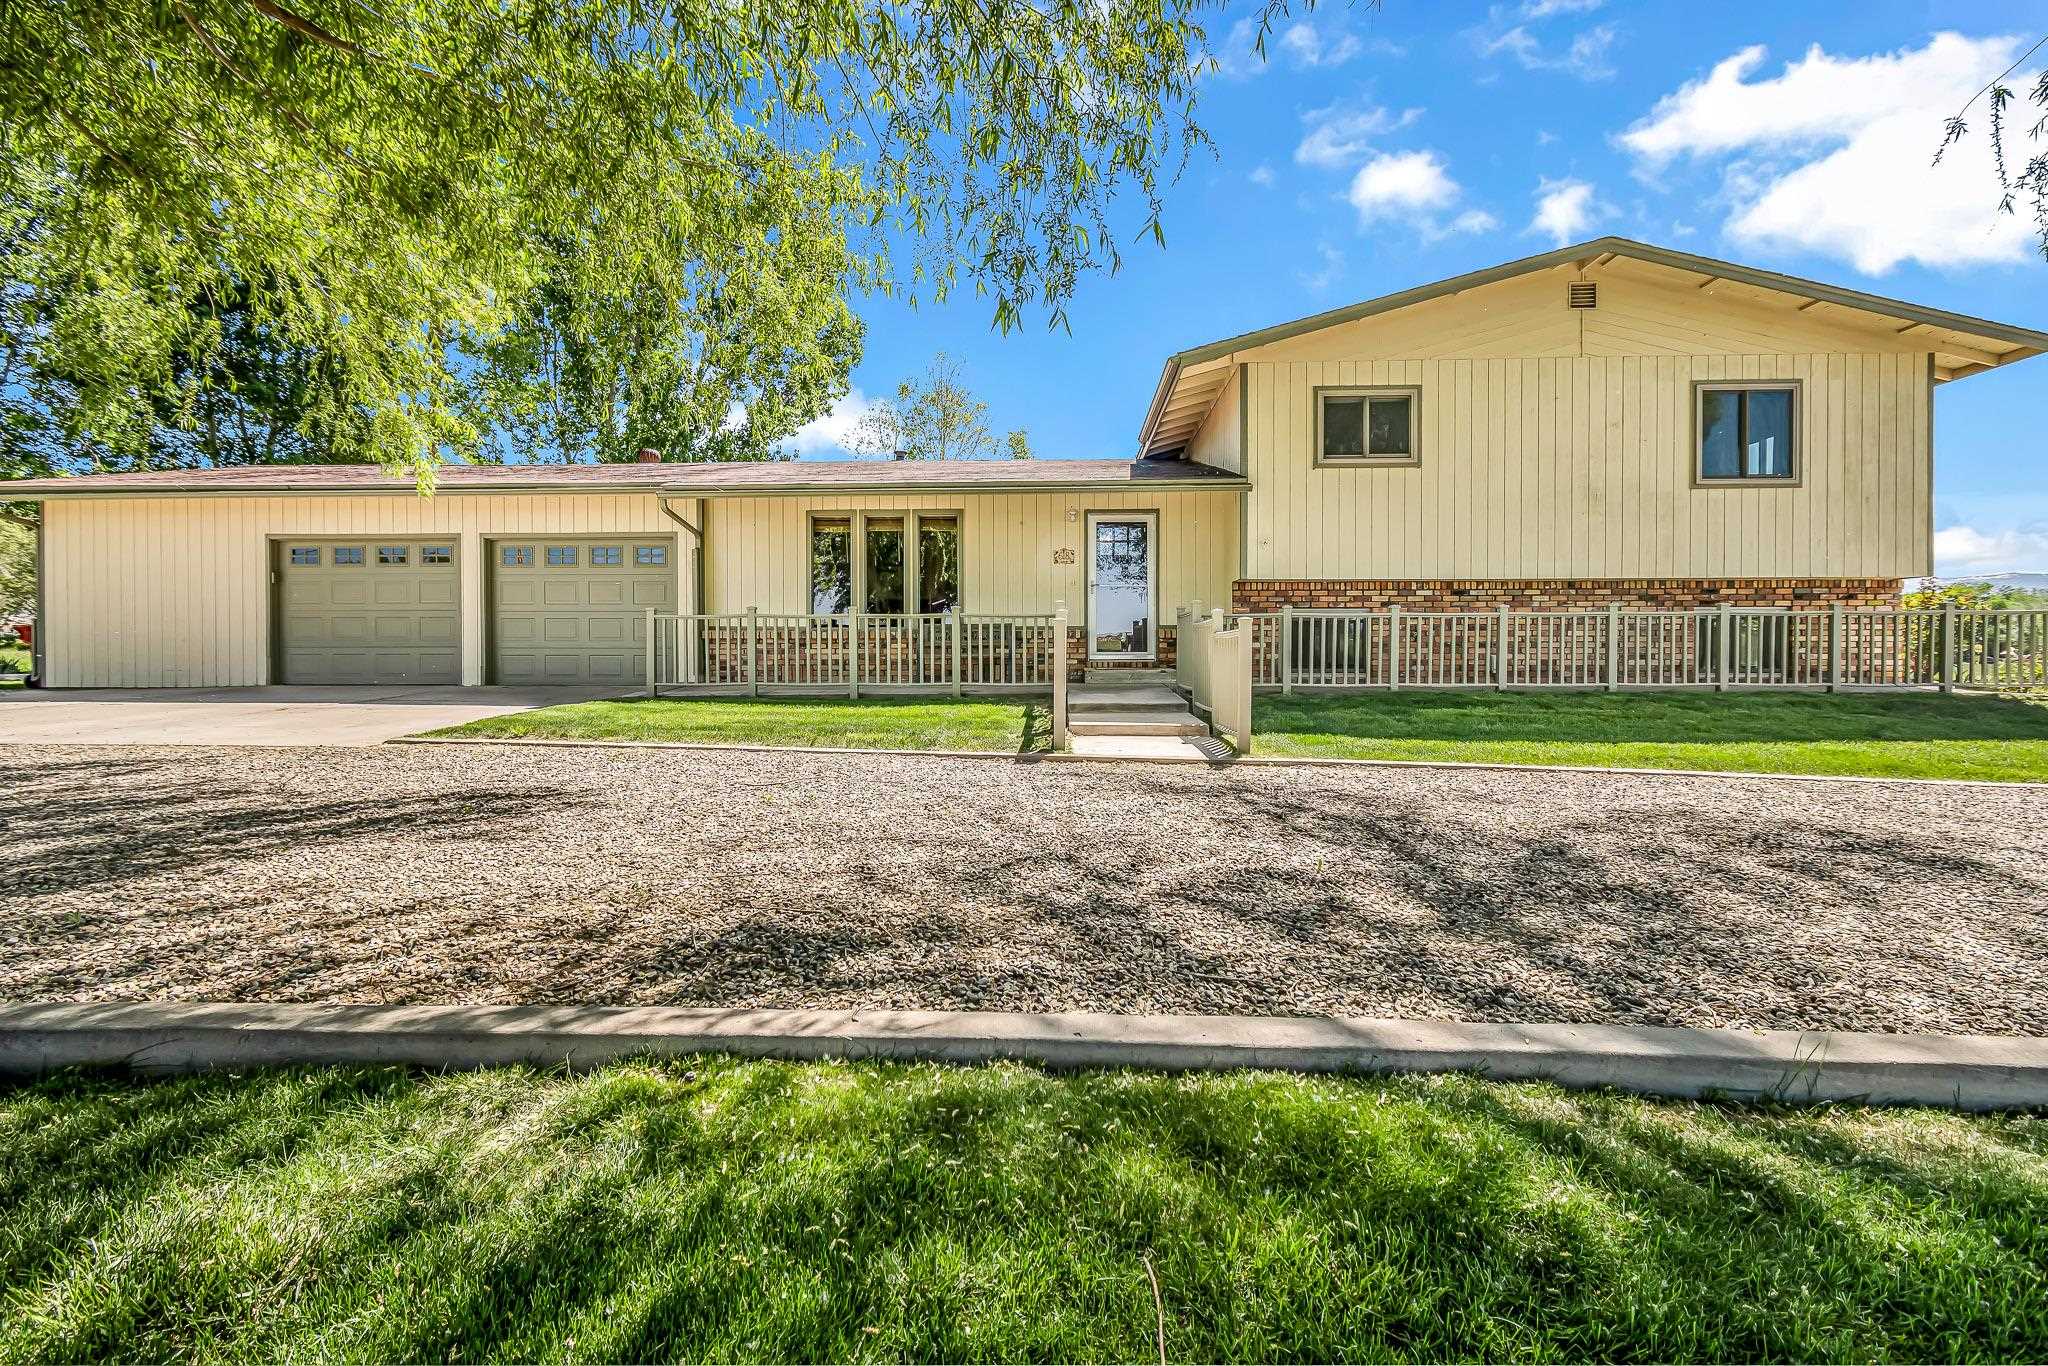 This 4-bedroom, 3.5 bathroom home is located on 9.57 acres in the heart of the Mesa County’s agricultural mecca near Palisade. The home is a 2304 sf, tri-level design that was built in 1977.  The kitchen has a window with unprecedented views of Grand Mesa. The kitchen’s cute farmstyle design includes double ovens, refrigerator, electric cook-top, dishwasher, wine fridge, garbage disposal and overhead exhaust fan above the cook-top and a large pantry area.  There are two separate living areas – one on the main floor as you enter the home and the second is in the lower part of the home. Large windows (new in 2022) are found throughout the home allowing for maximum natural light throughout. Flooring includes hardwood, carpet and tile.  There is an oversized 2 car garage attached to the home with a large storage area, ½ bath and office area. Outside is a 30’ X 50’ metal shed / garage / workshop with an RV hookup. A large 50’ long covered carport area alongside the exterior of the garage that works perfectly for either hay storage or as a covered area to park an RV.  The property was previously home to an Alpaca farm. Although the Alpaca farm is no longer in business, the property is still set up with an arena area. The panels have been removed so the new owner would need to replace the panels. Potable water is available to allow for fresh water to be delivered within the arena / corral area. There is no HOA and livestock are allowed on the property. A chicken coop that currently houses 5 hens is also included.  The grass hay that is grown on the property is a high quality variety that is perfect for alpacas and horses alike. The owners currently get 3 cuttings a year with an approximate yield of 550 – 600 bales. The bales are approximately 75lbs each and are selling this year for $9 each. The field has been maintained with proper fertilization and a neighbor processes (cuts, bales and stacks) the hay for each cutting.  There is gated pipe that is included in the purchase price.    The property has approximately 10 shares of Price Ditch water that is delivered to the property.  The cost for the irrigation water is assessed thru the annual property taxes. The property is zoned AFT.  It is not common to find a quality property of this size available anywhere in the Grand Valley area, let alone in such close proximity to Palisade.